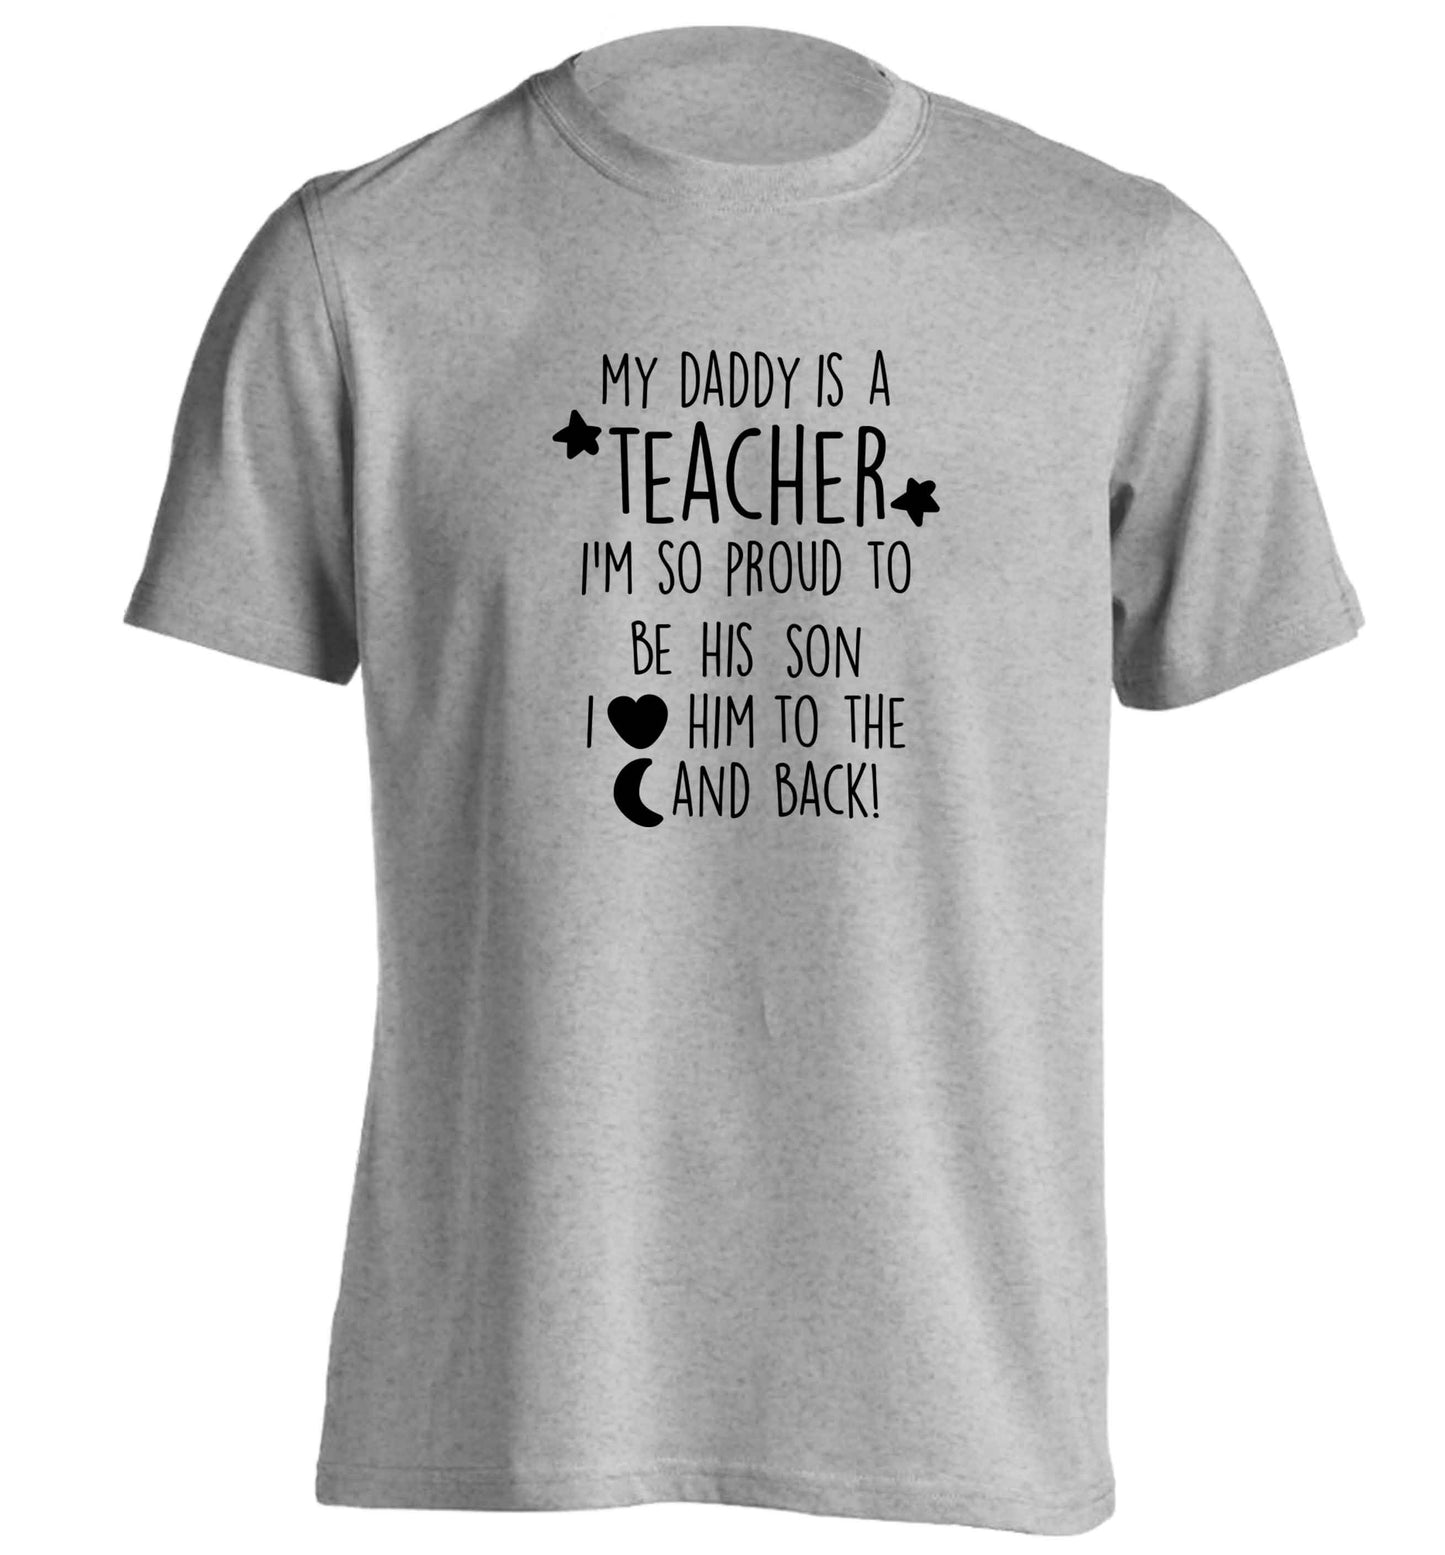 My daddy is a teacher I'm so proud to be his son I love her to the moon and back adults unisex grey Tshirt 2XL